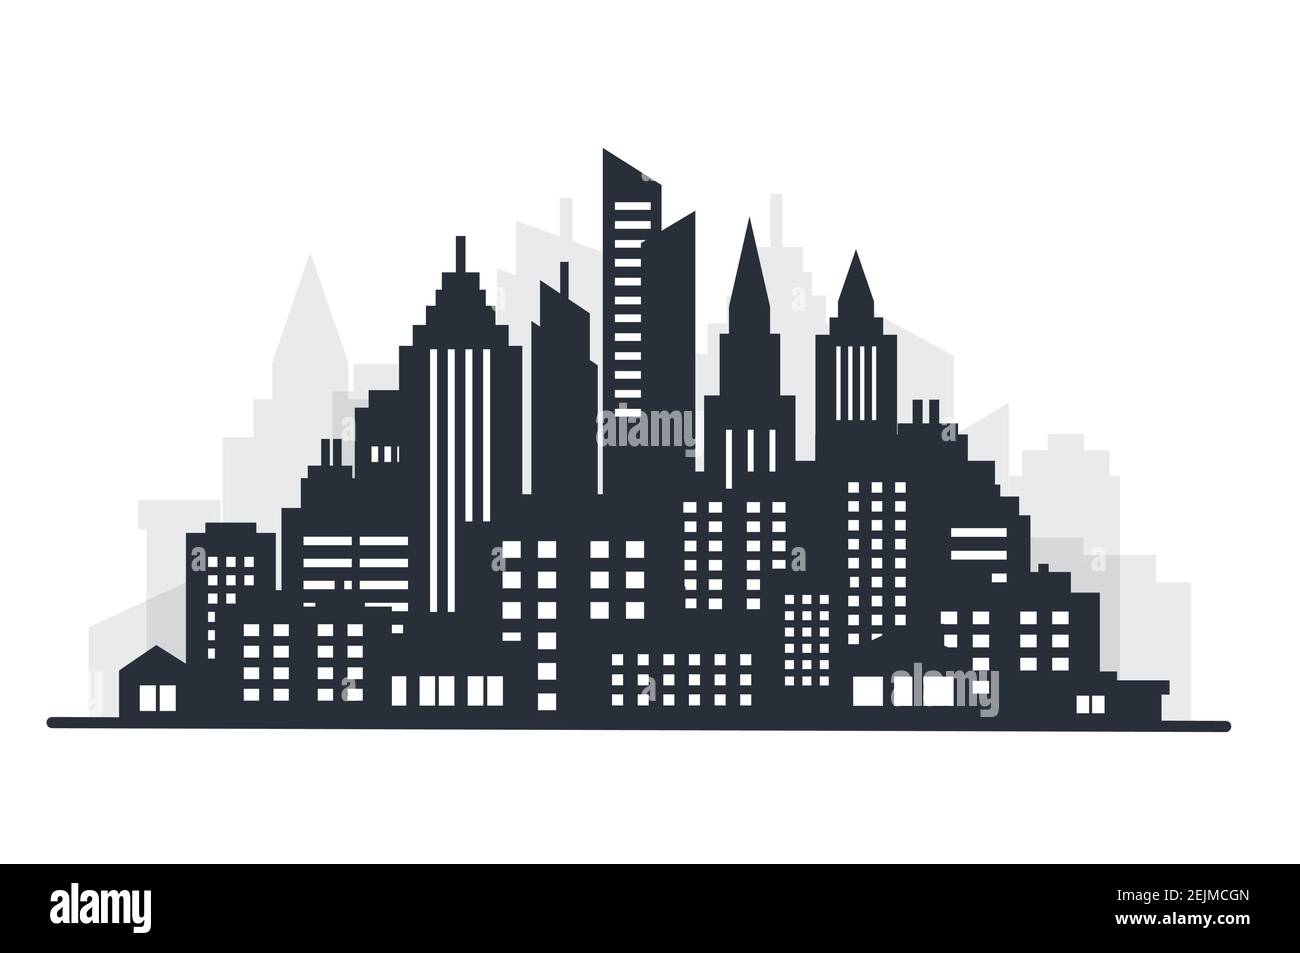 City silhouette land scape. Horizontal City landscape. Downtown landscape with high skyscrapers. Panorama architecture Goverment buildings illustratio Stock Vector